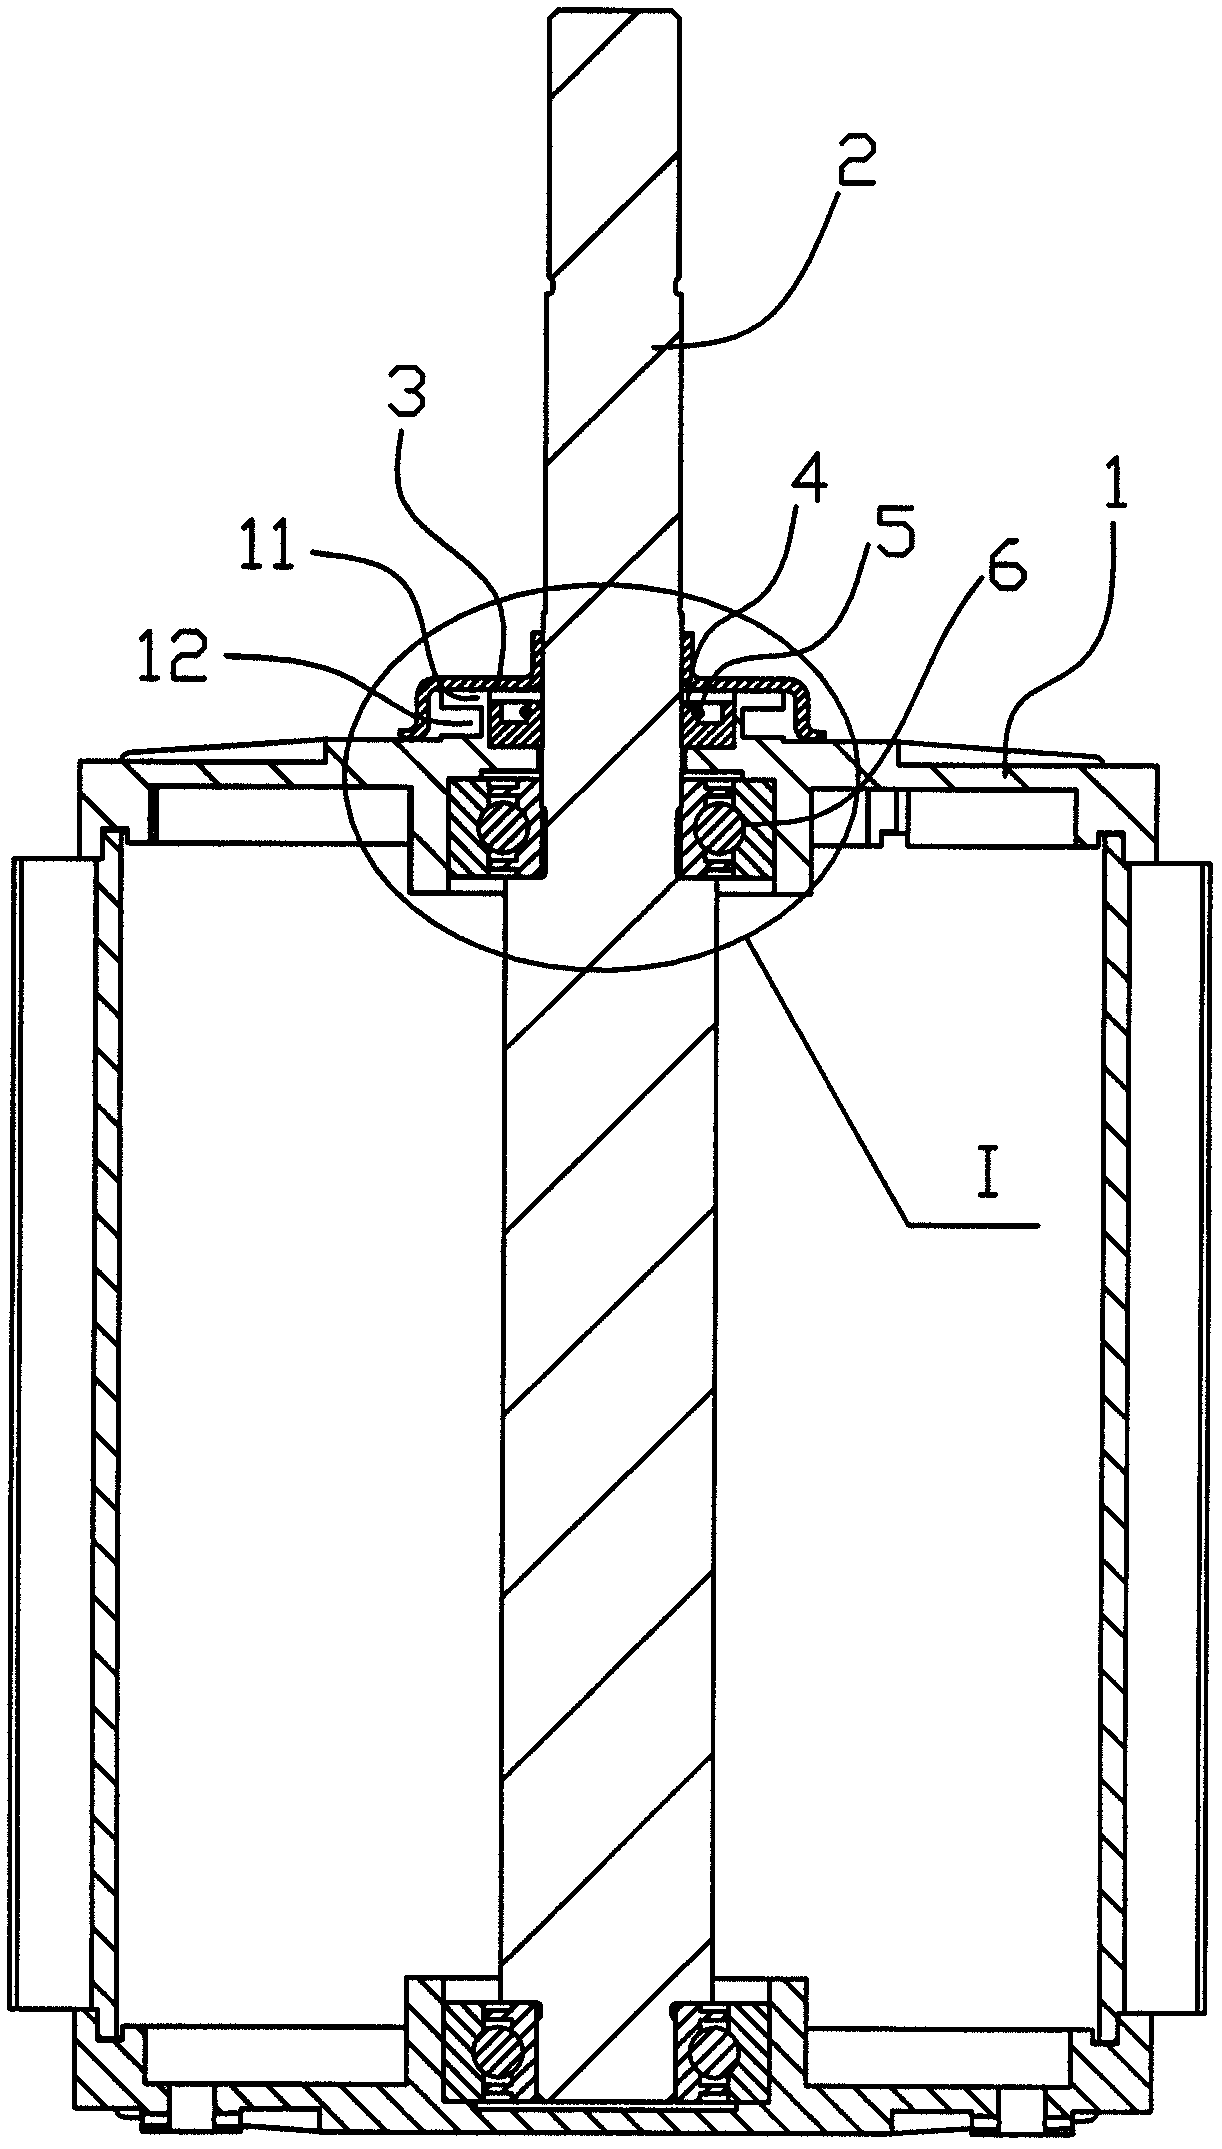 Sealing structure between motor shaft and motor cover